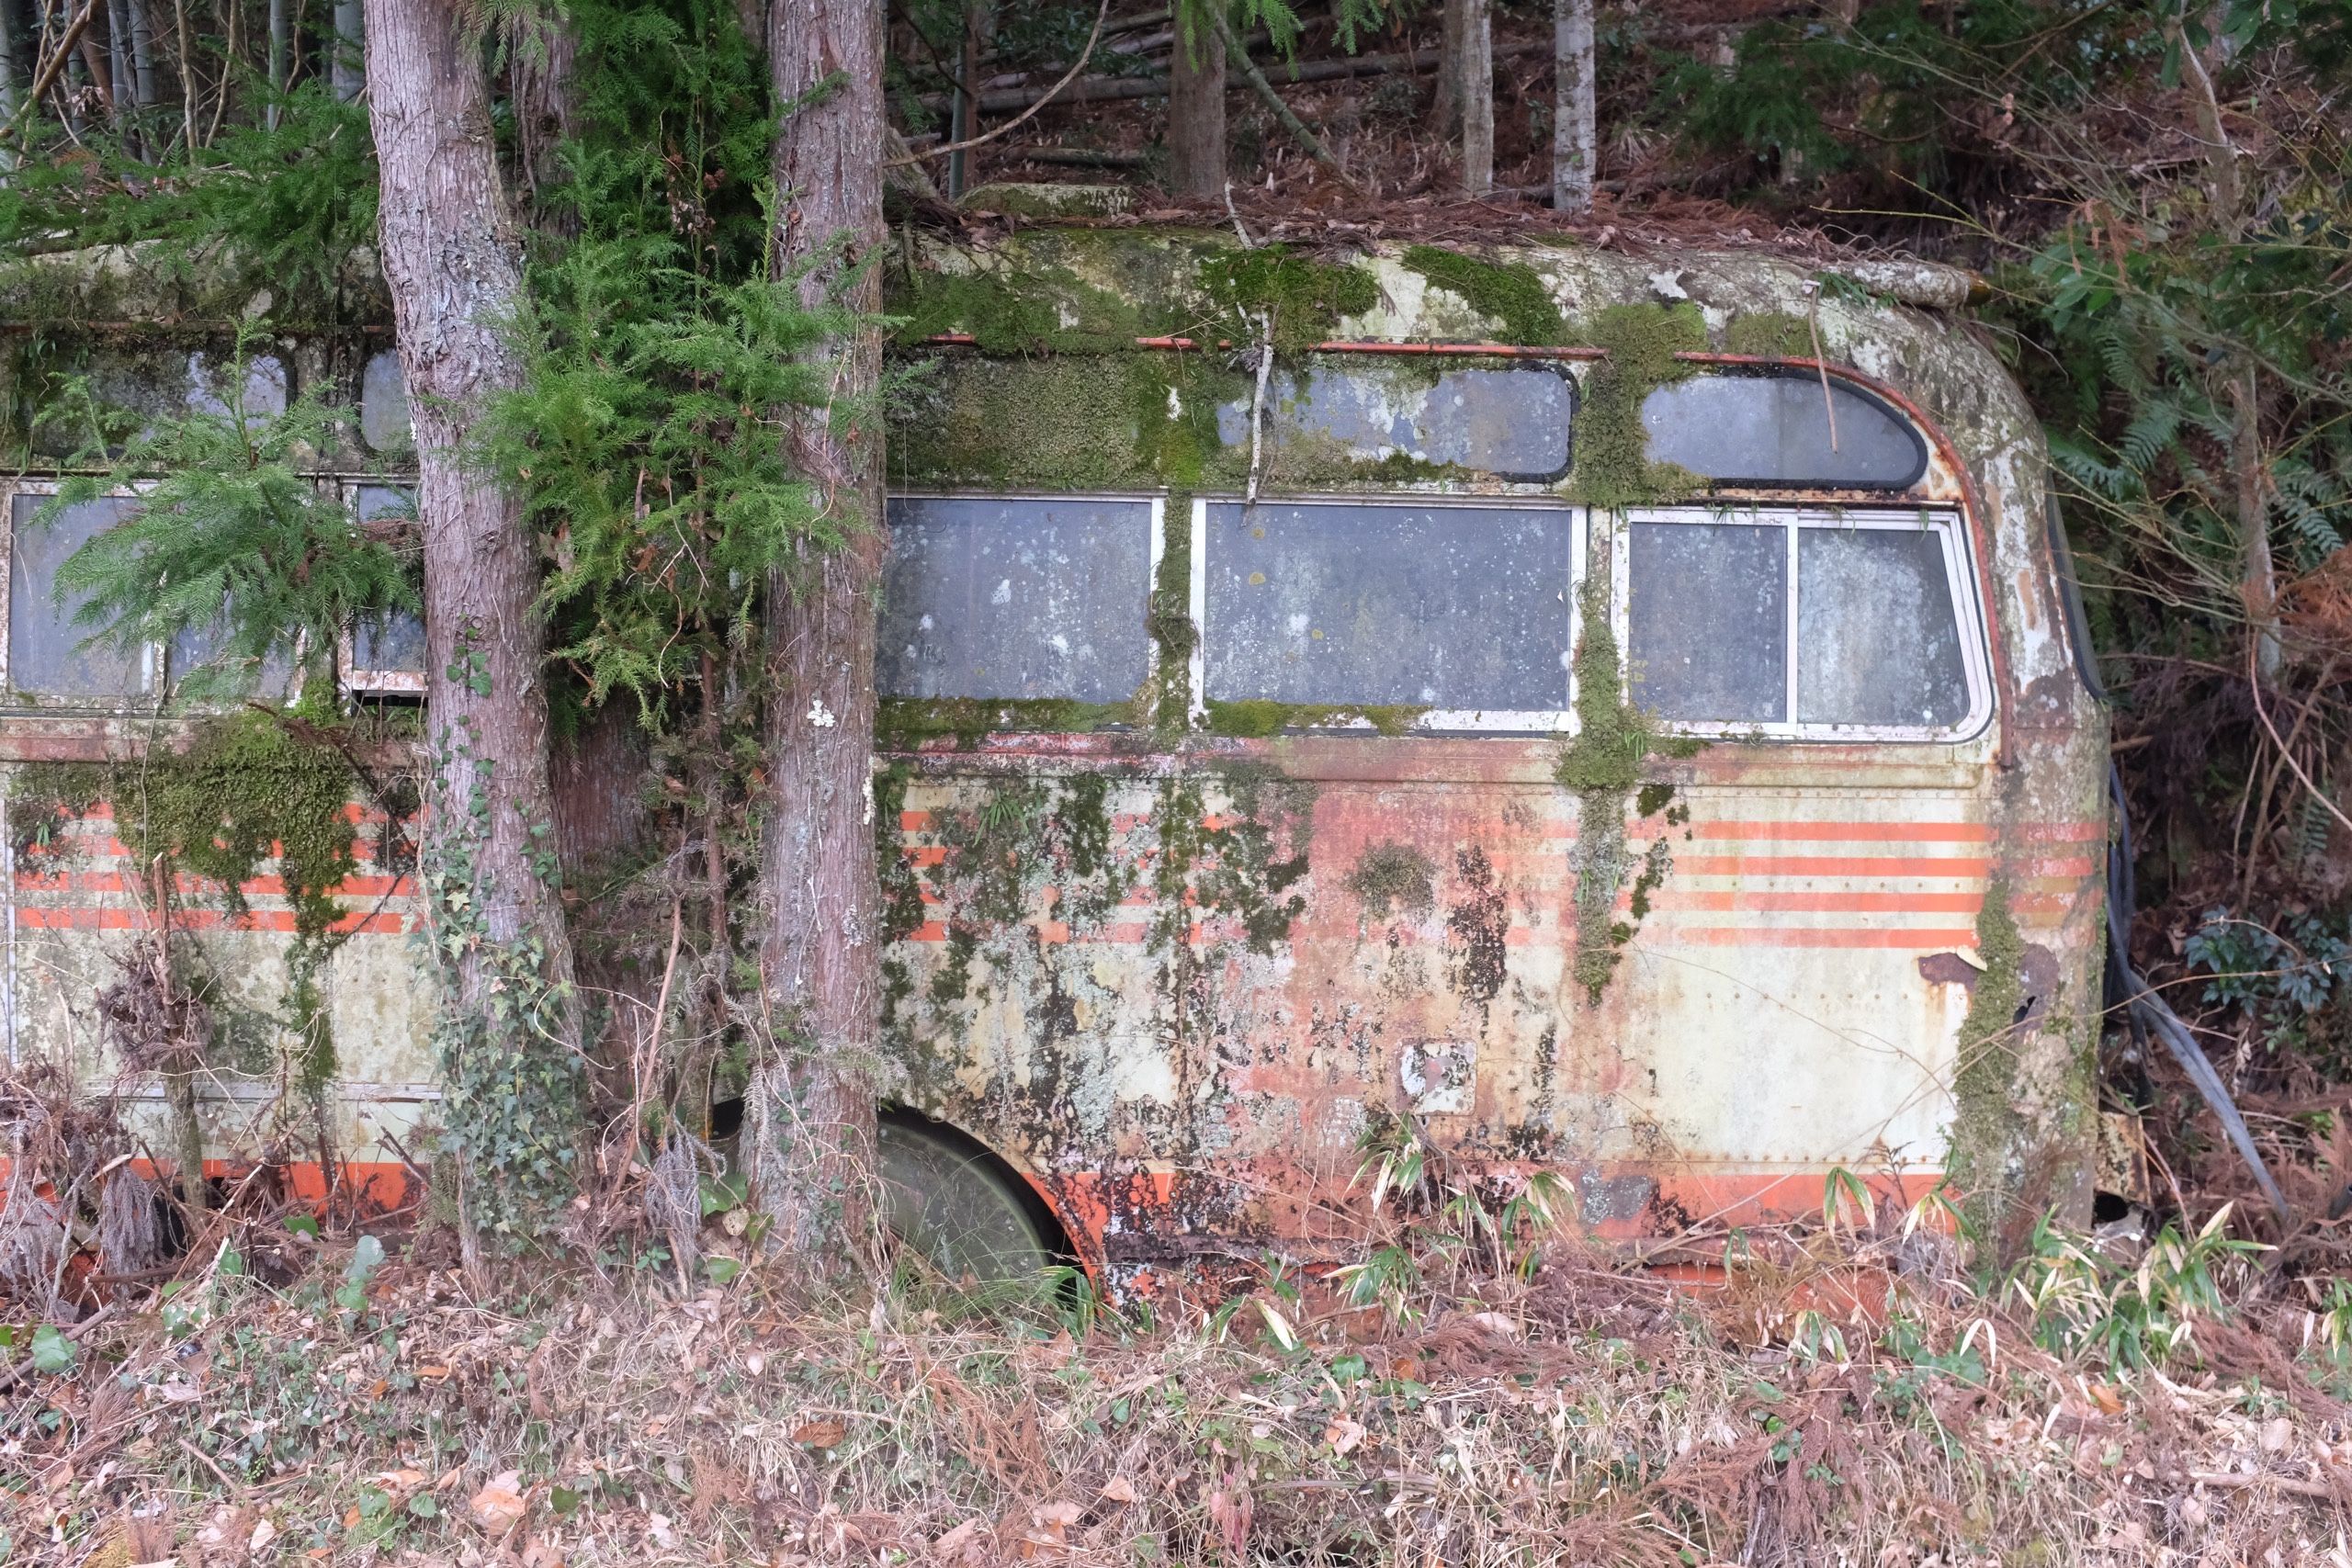 A very old bus overgrown with plants stands between trees.